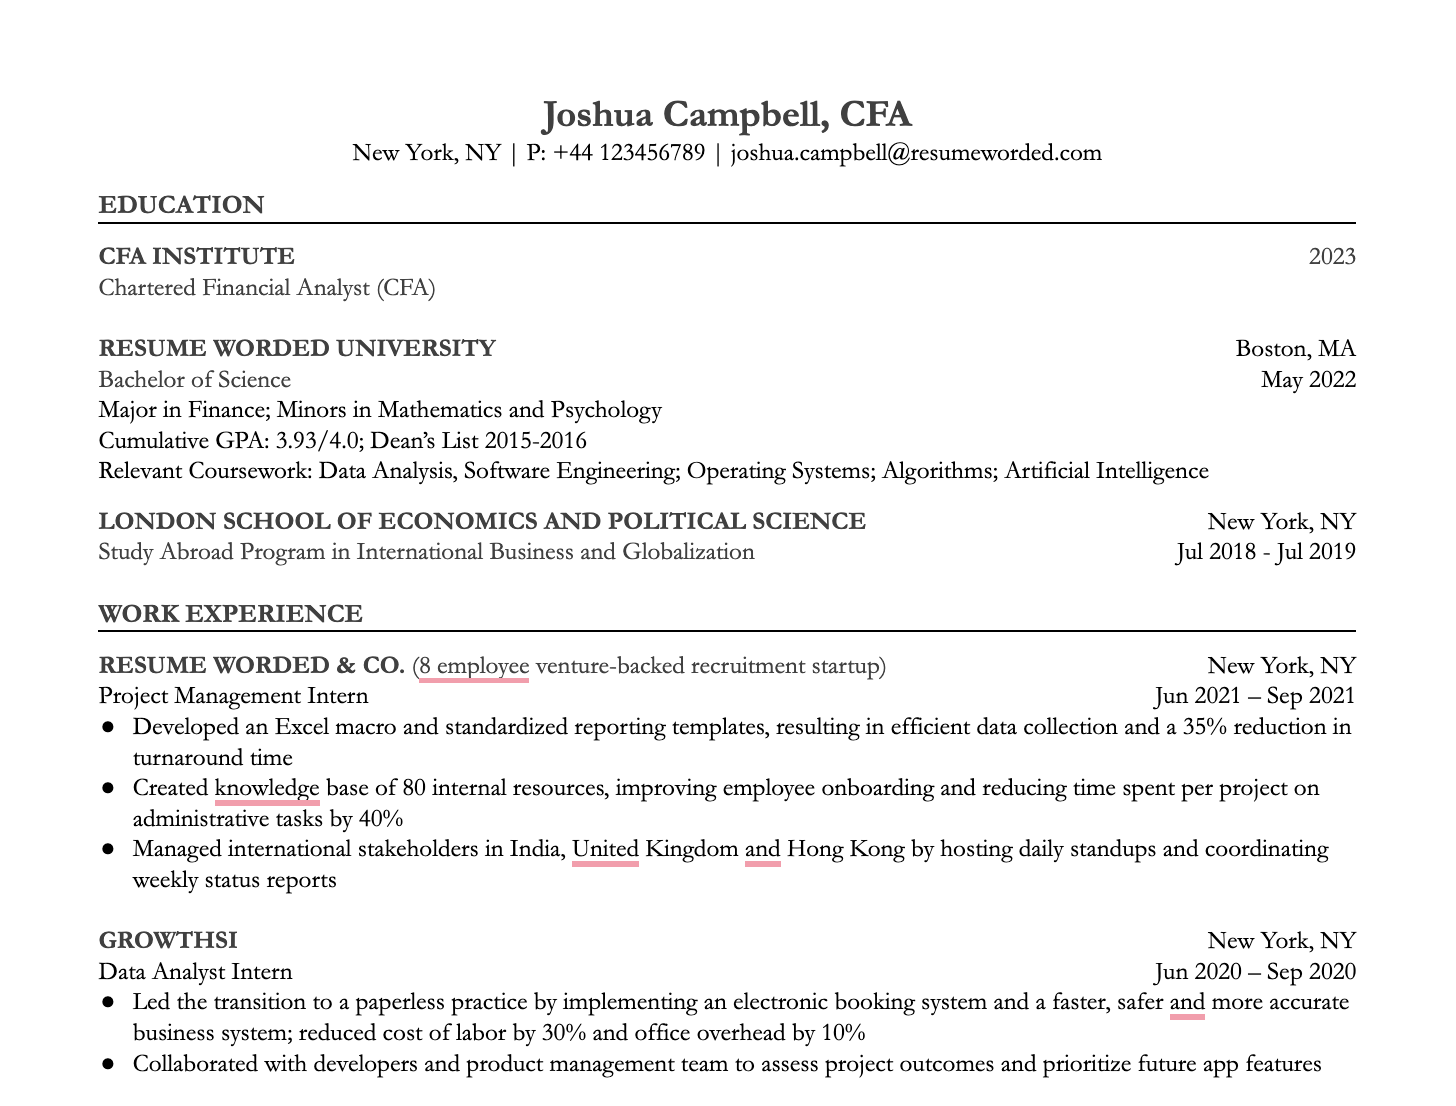 An example of how to include CFA on your resume in the Name and Education sections